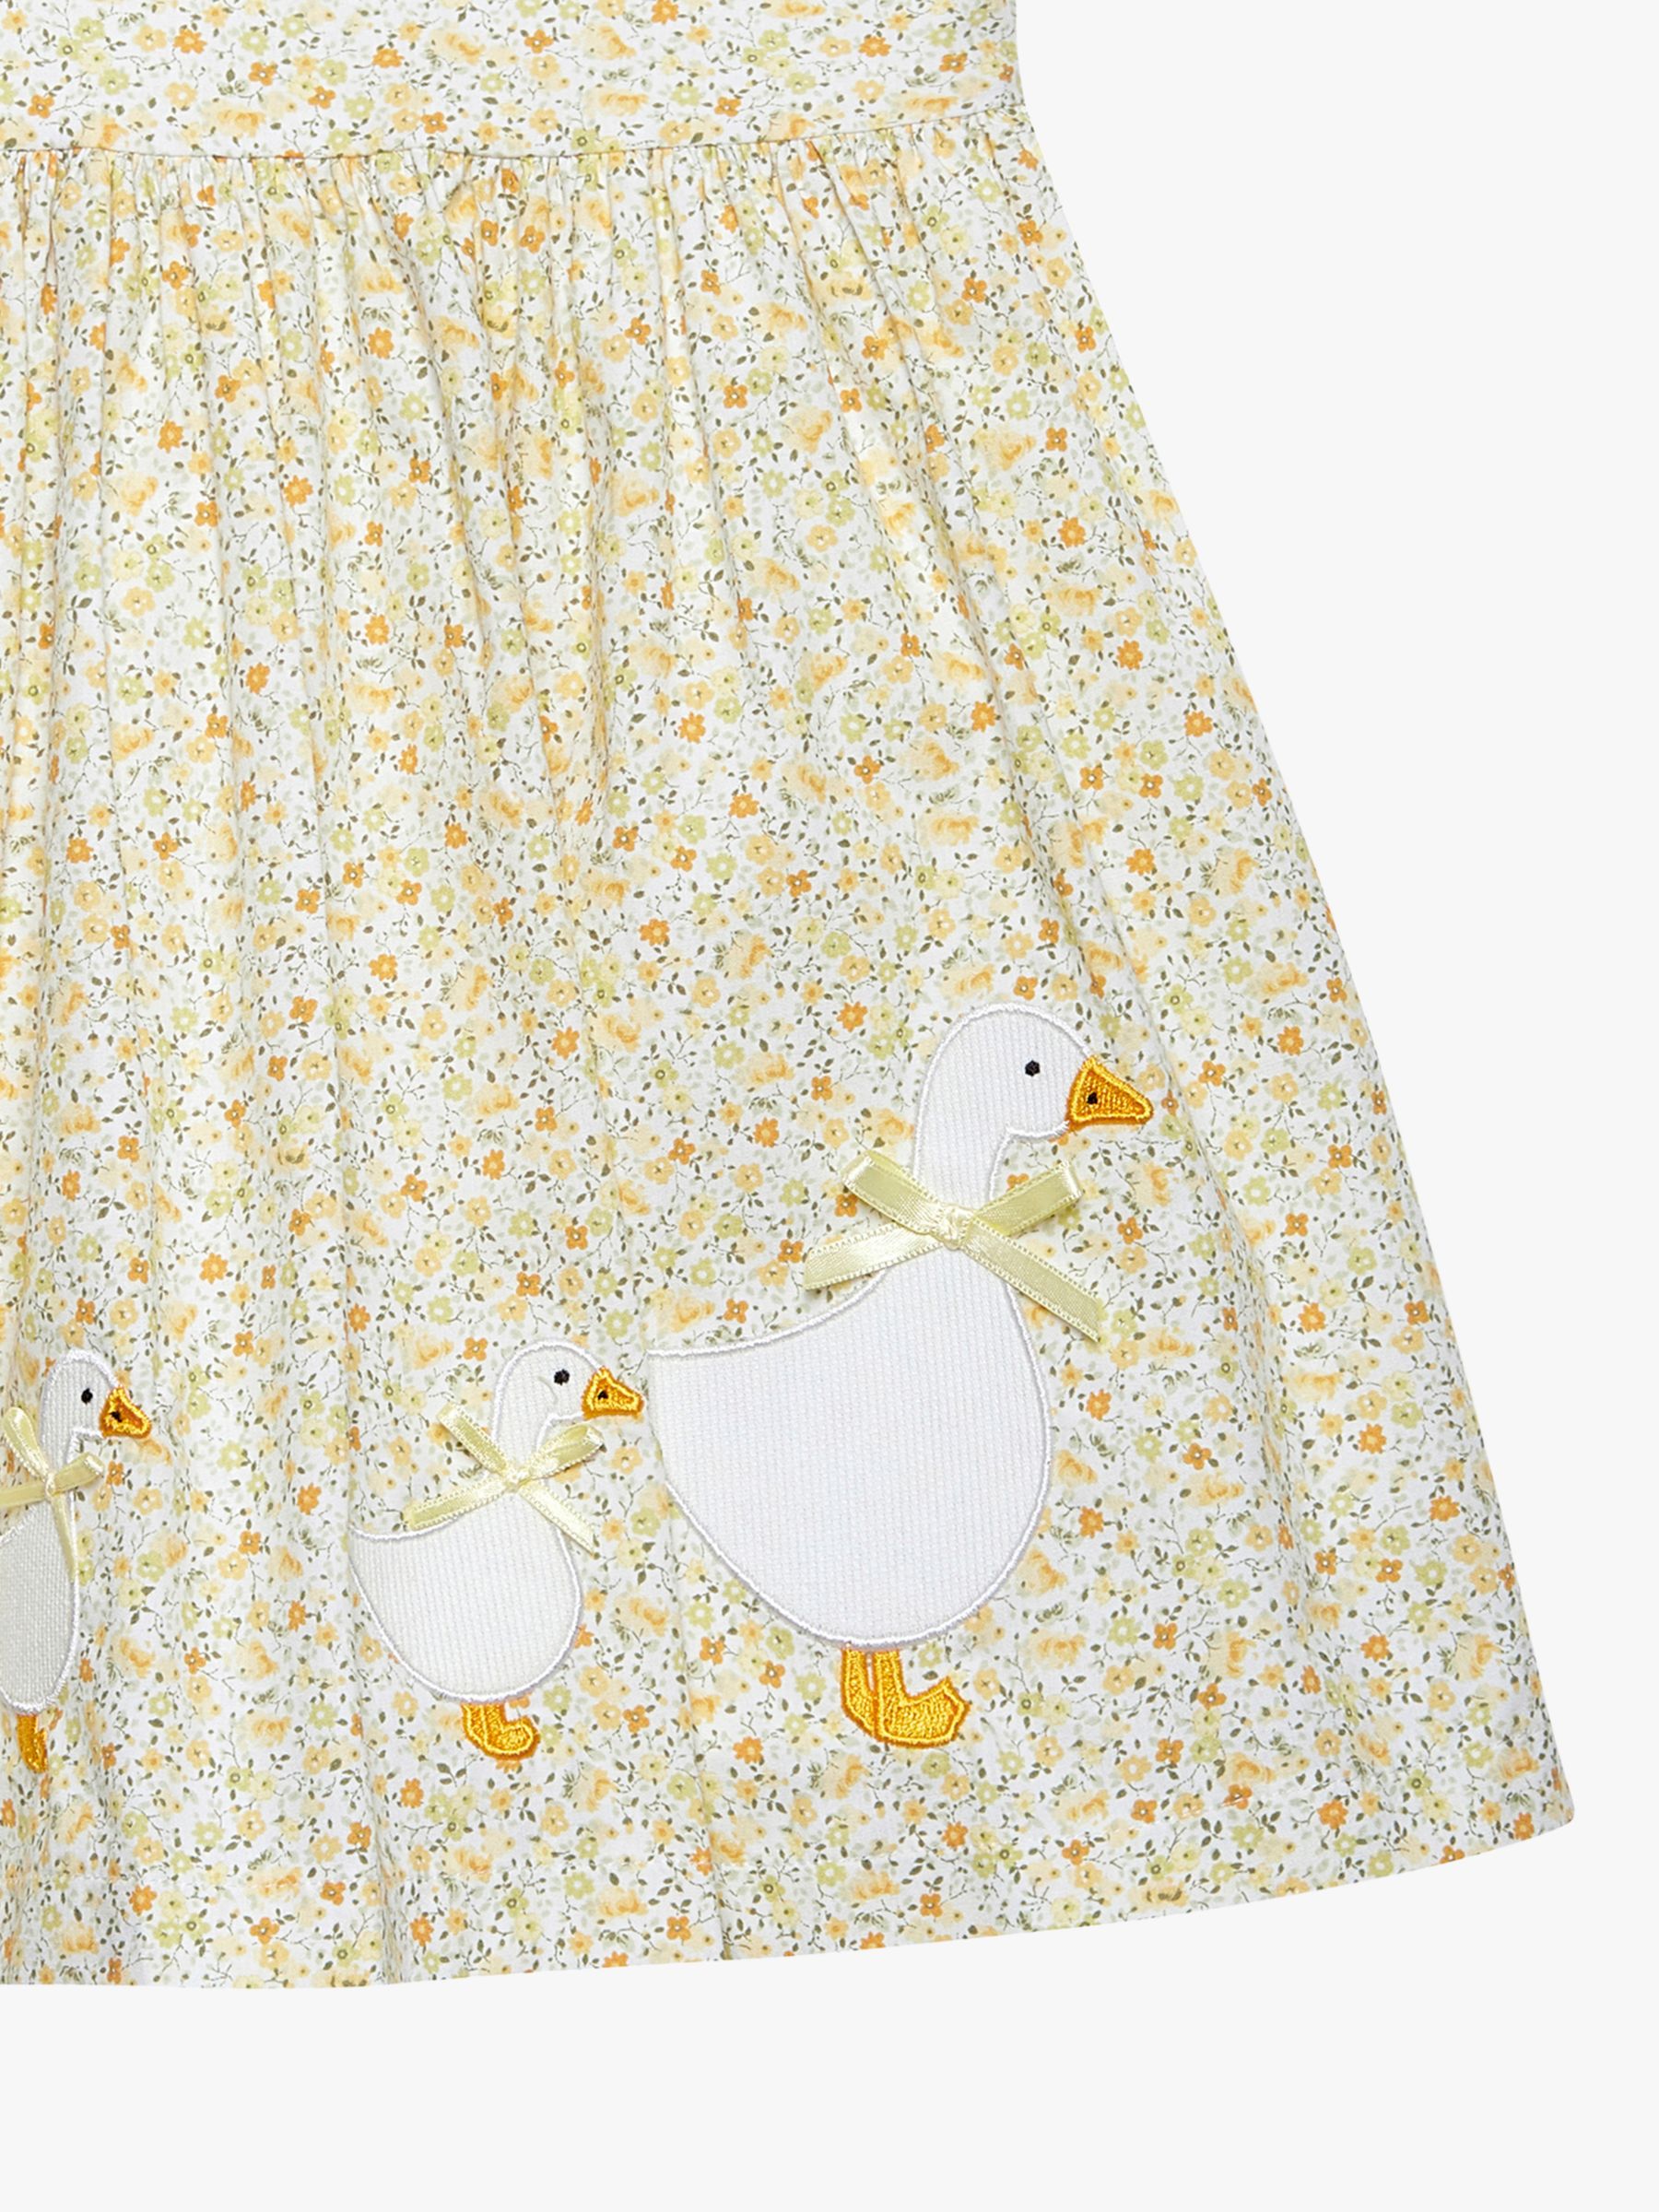 Buy Trotters Baby Floral Petal Collar Duck Dress, Yellow/Multi Online at johnlewis.com